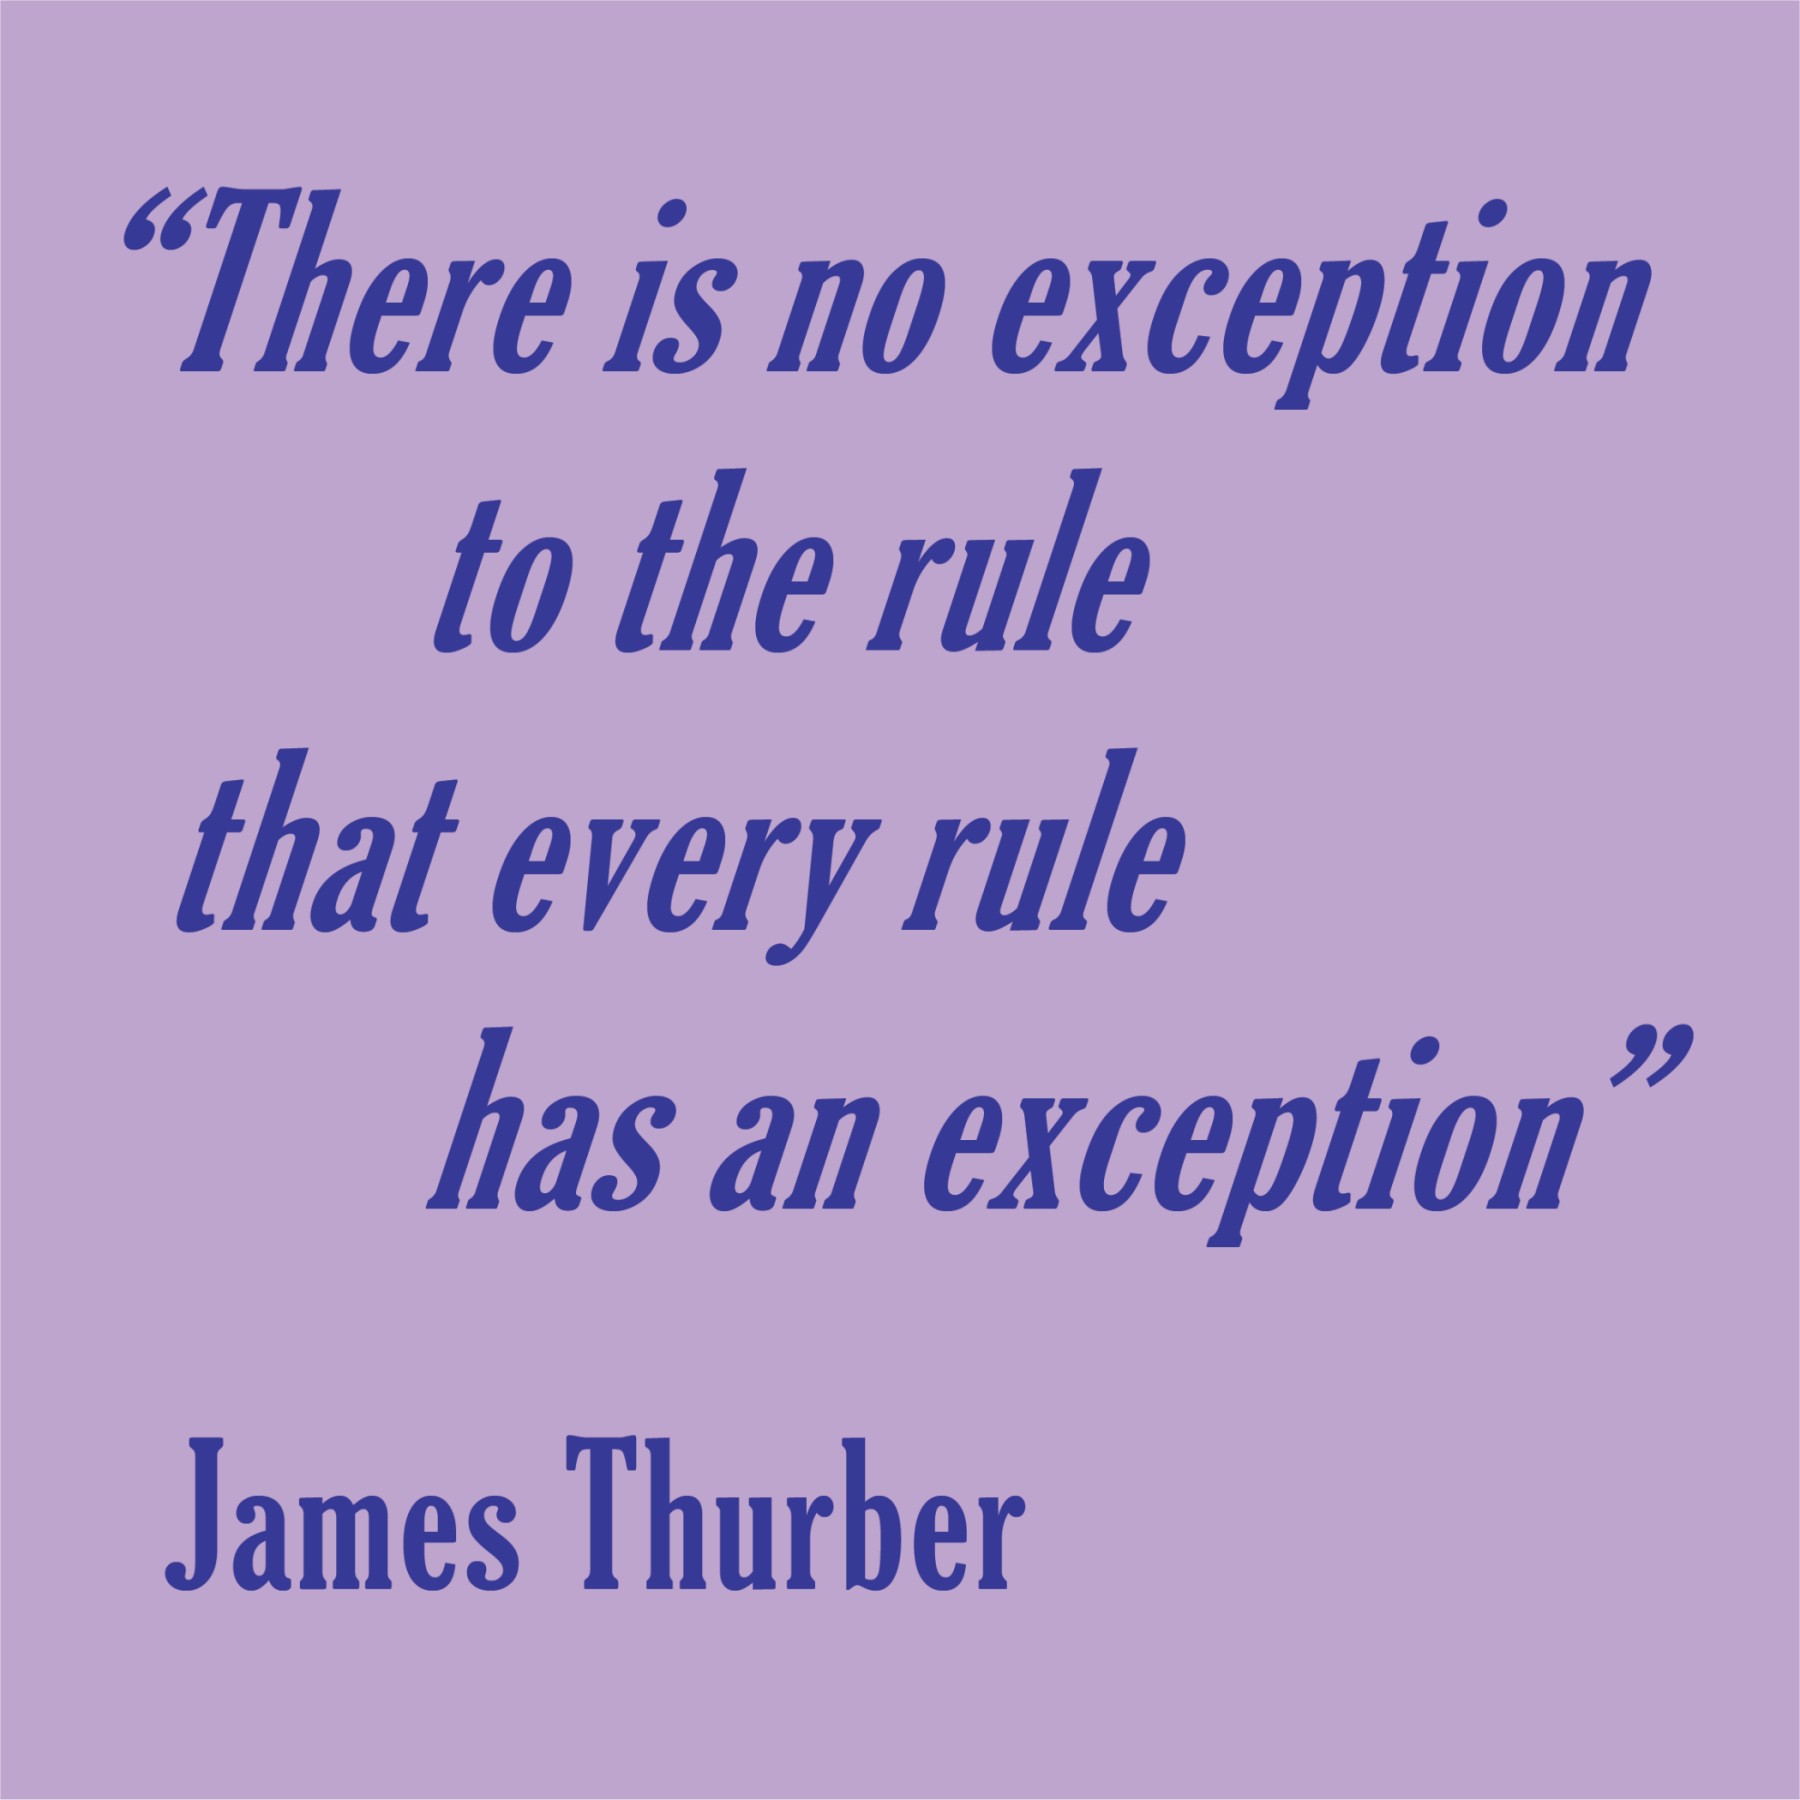 There is no exception quote “